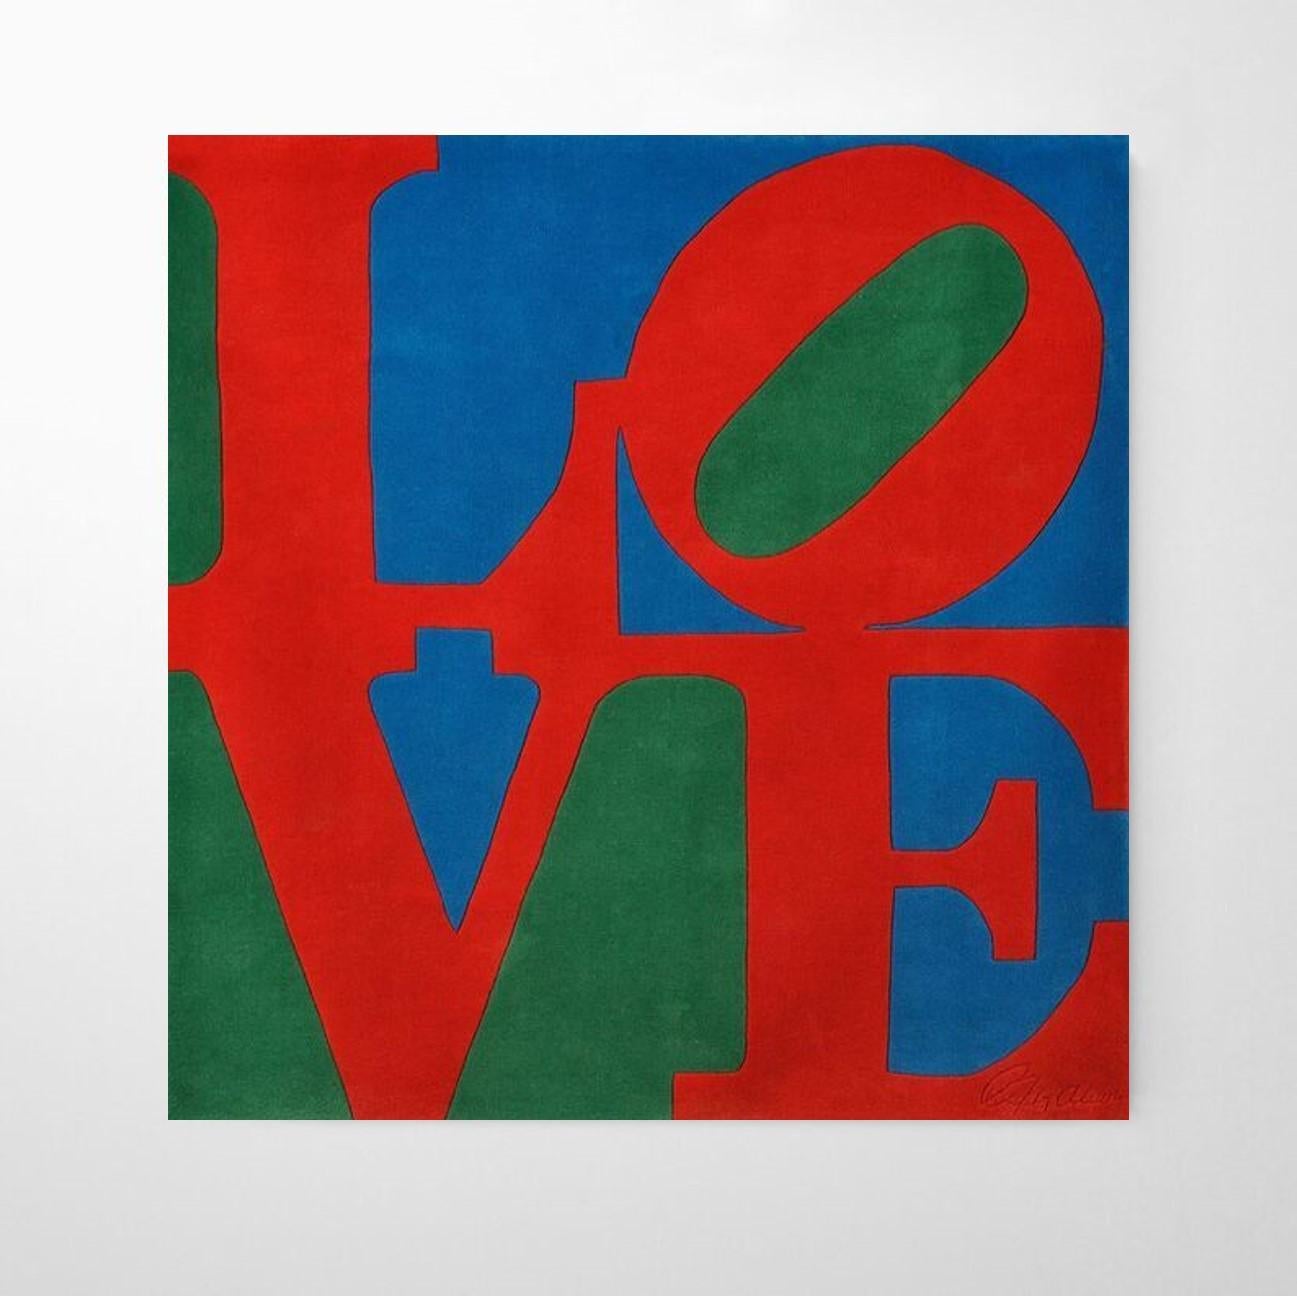 Robert Indiana
Classic Love, 1995
Hand Woven Wool Tapestry
182.5 × 182 cm (71.9 × 71.7 in)
Signed and numbered on label
Edition of 150
In excellent condition
Provenance: acquired from publisher
Accompanied by certificate of authenticity

With this